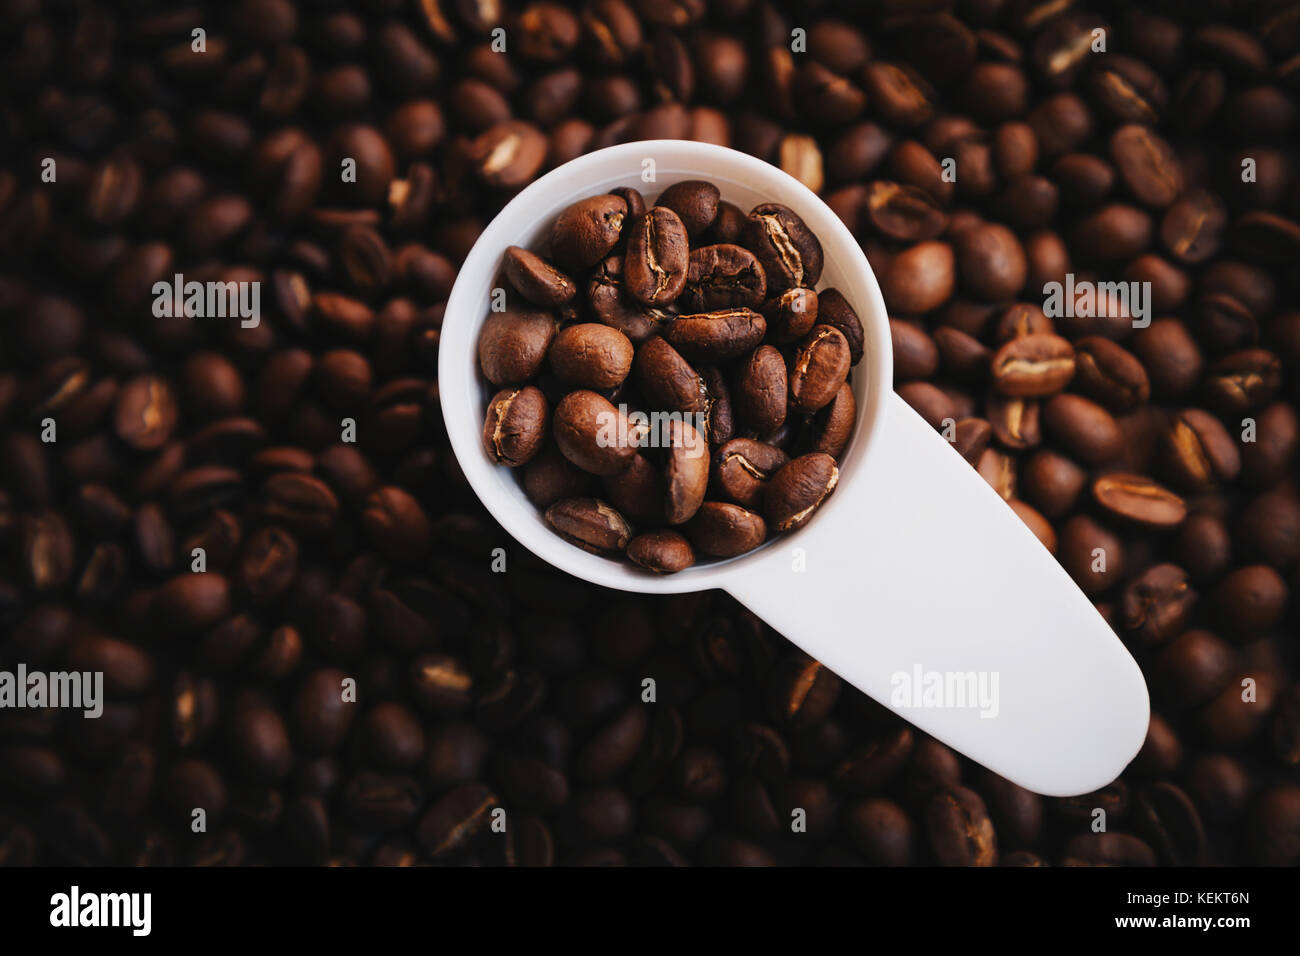 specialty coffee beans in the white plastic spoon ready to making a cup of coffee. Stock Photo